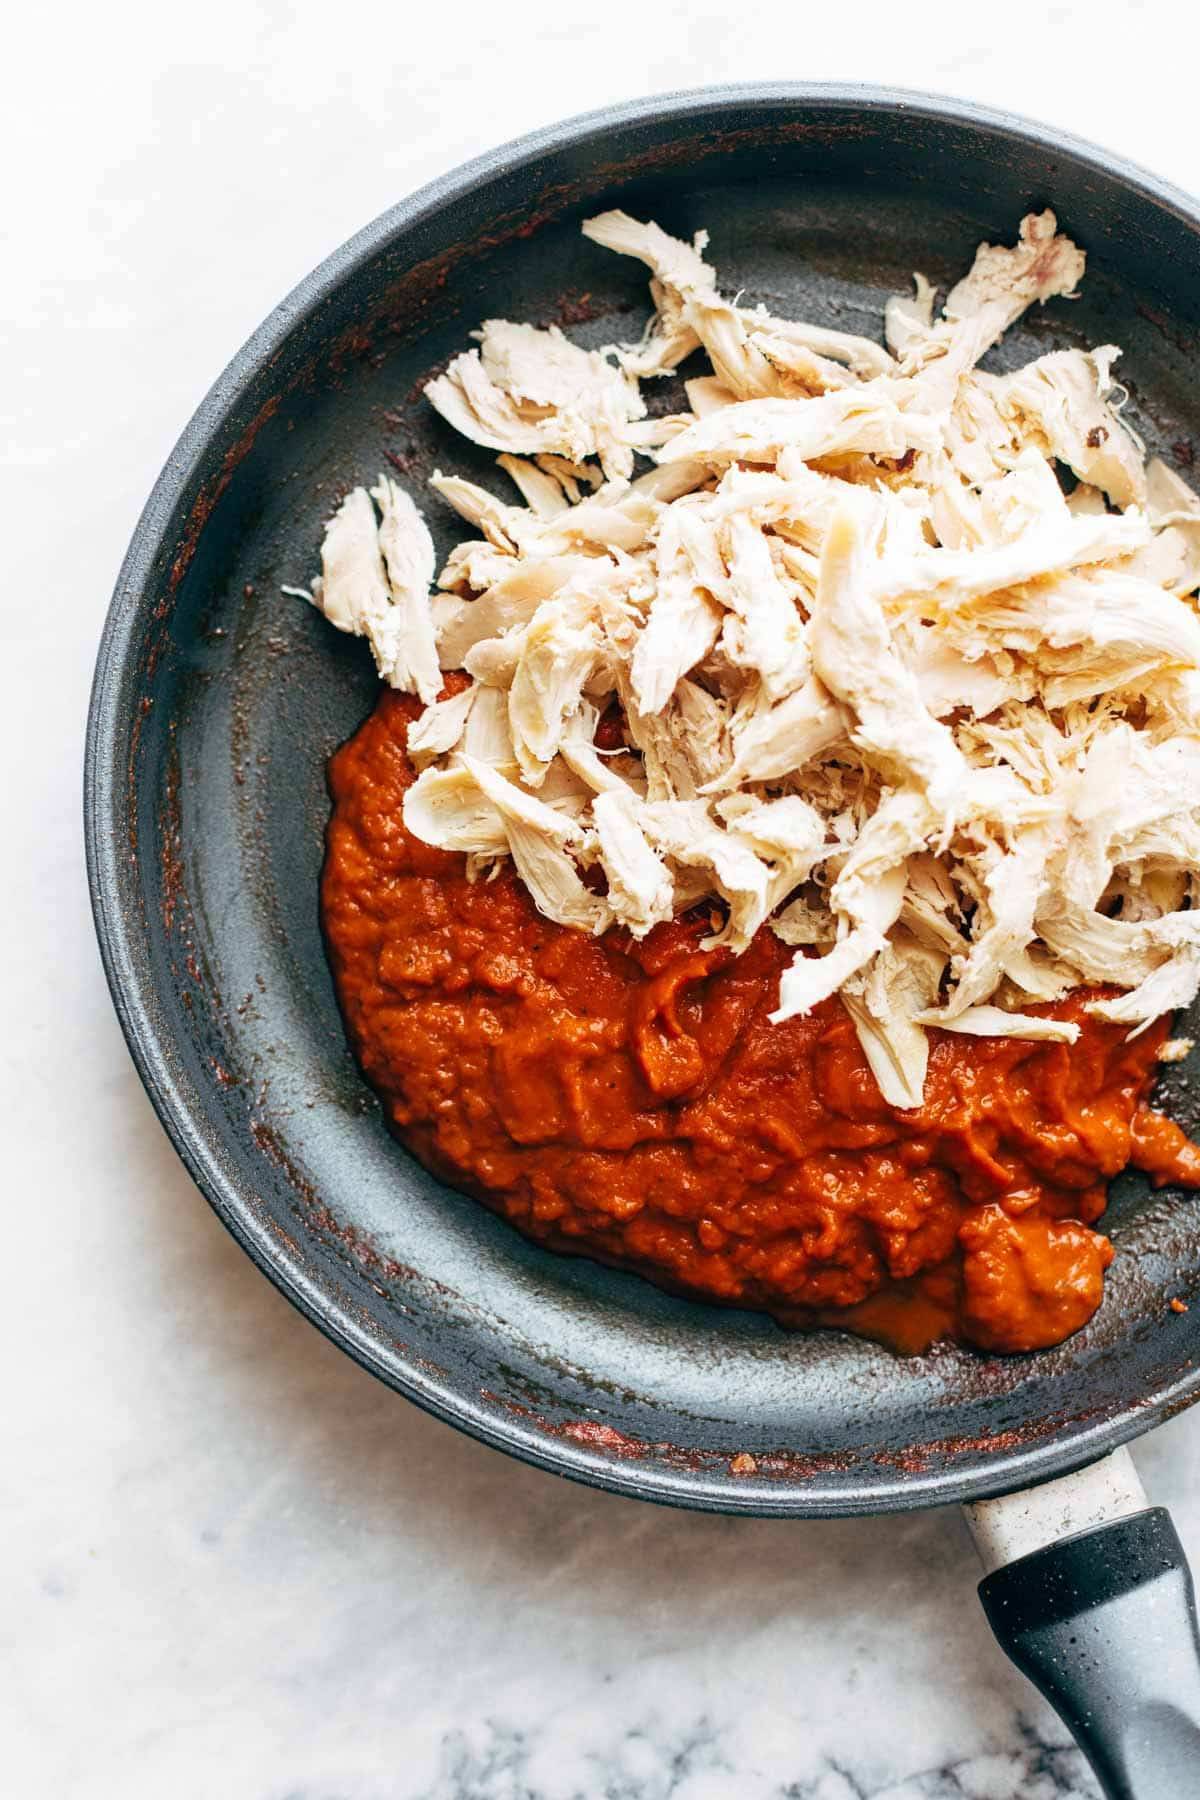 Shredded chicken and tinga sauce in pan.